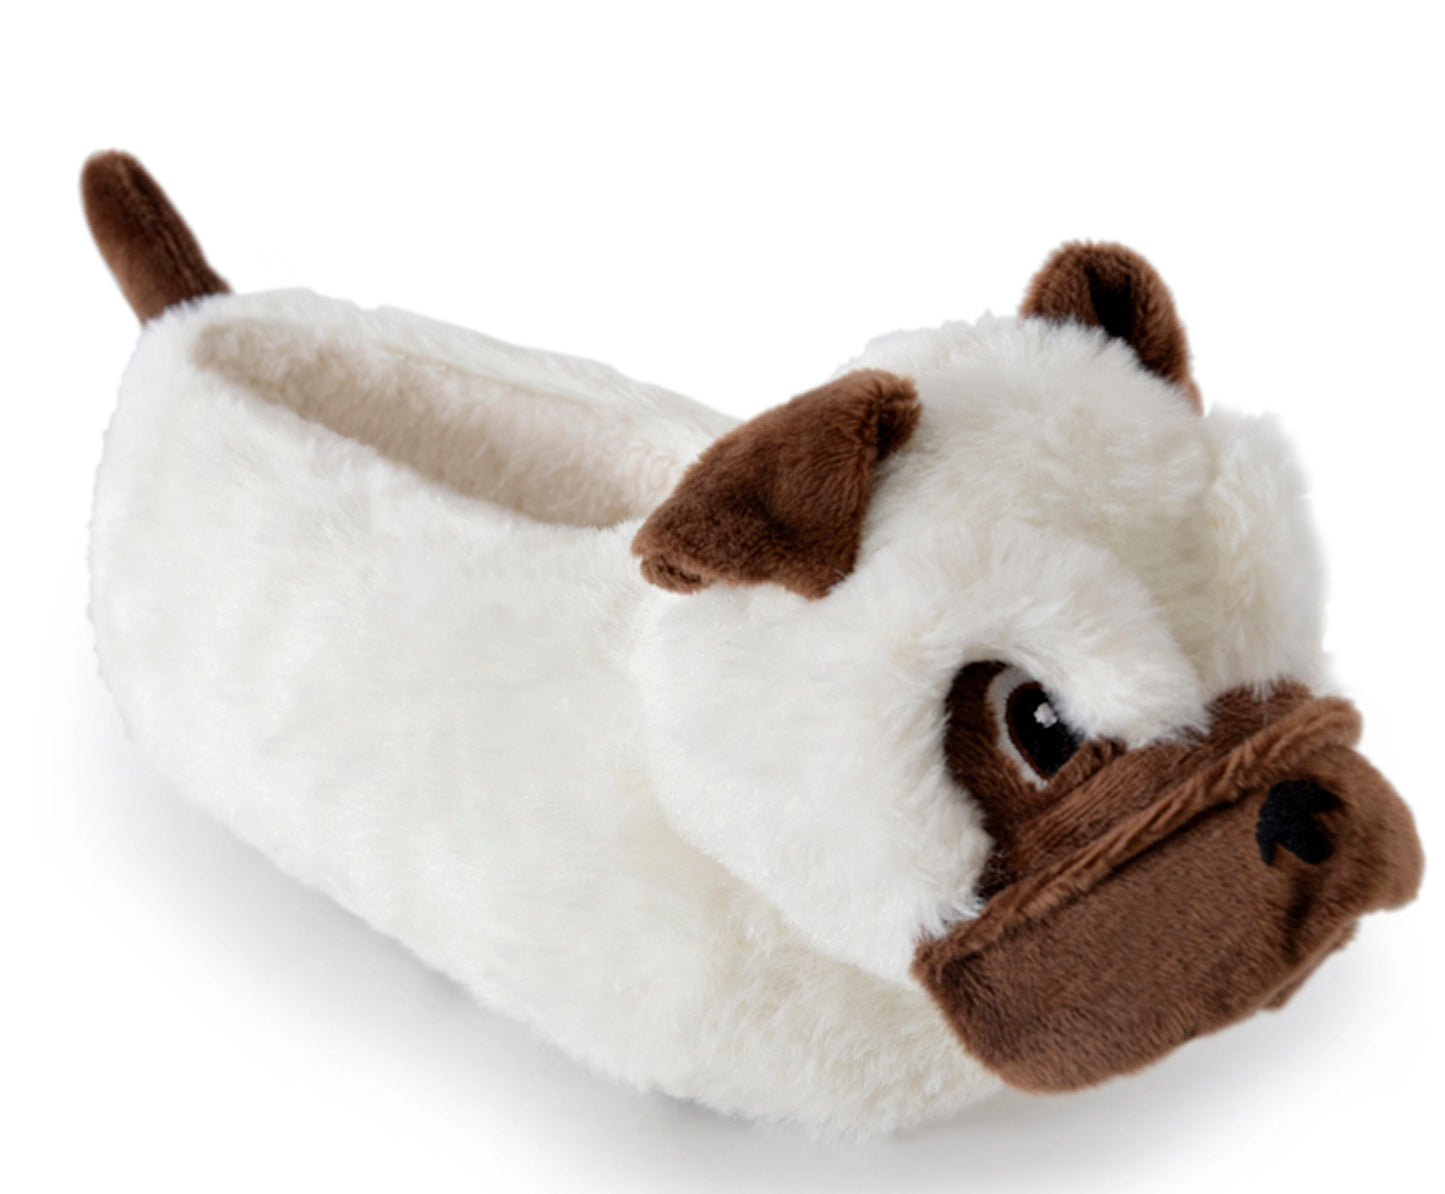 Girls, kids 3D Pug Dog / Puppy Novelty Slippers Brown or White